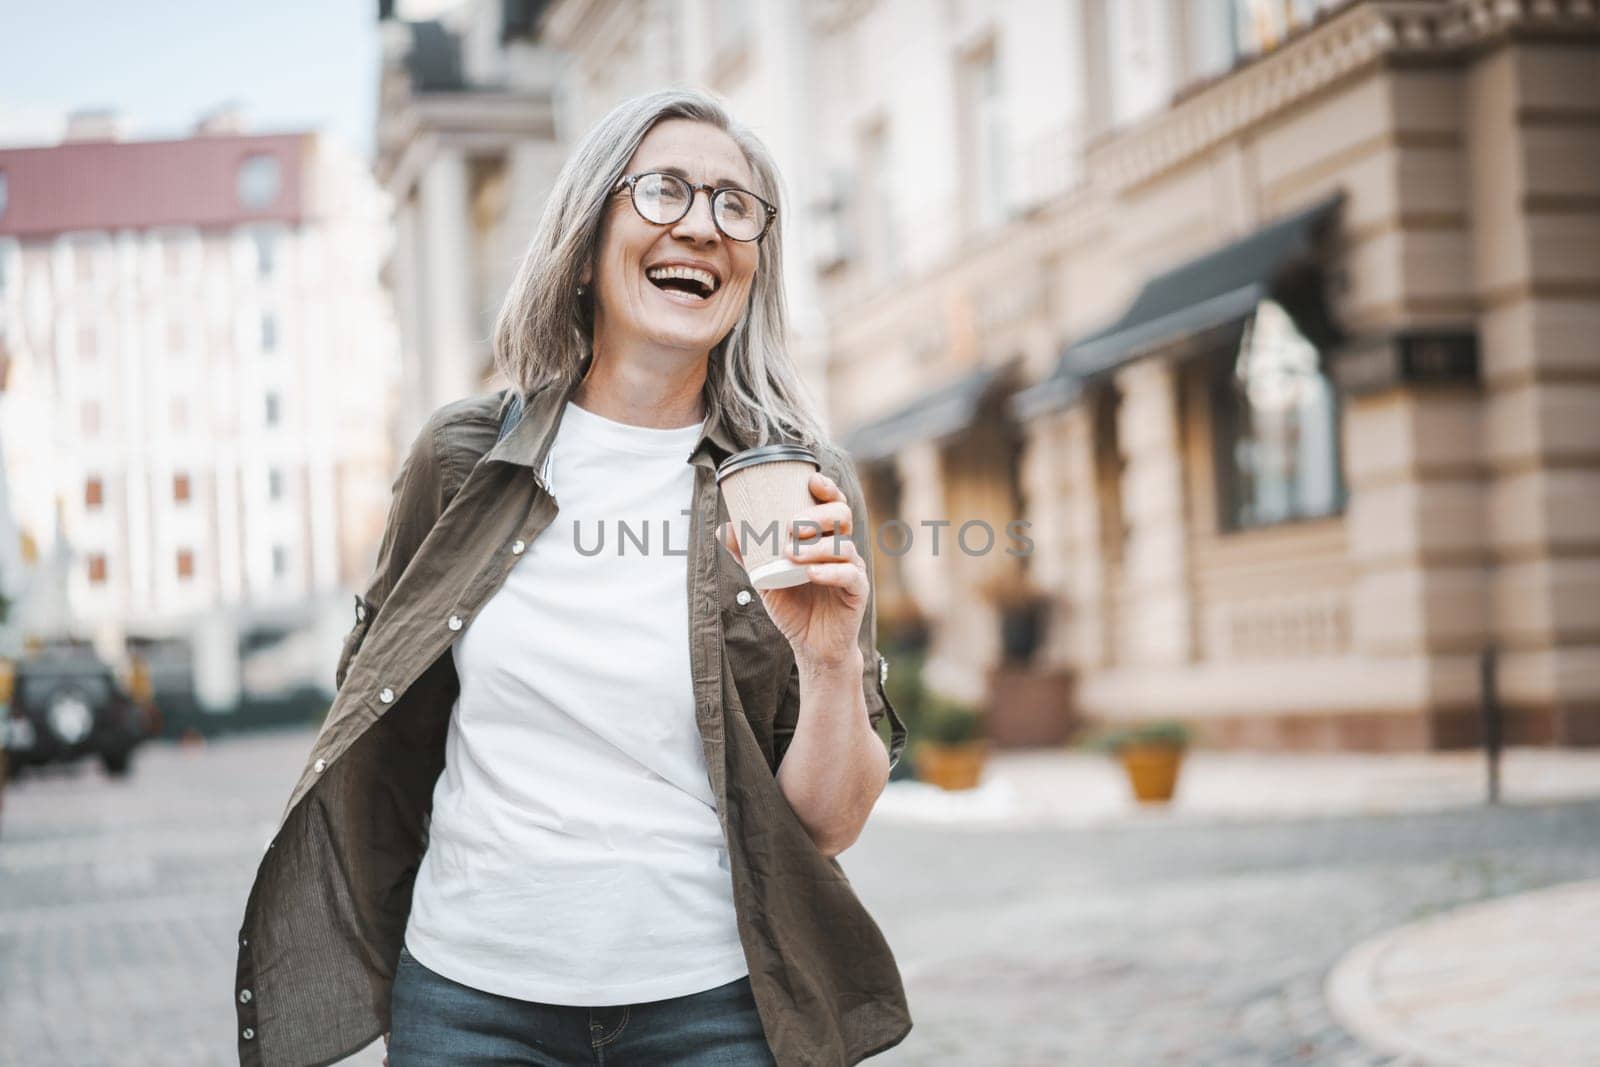 Concept of happy old age through image of silver-haired mature senior woman walking in city, enjoying cup of coffee. Woman is captured in moment of joy and contentment, with smile and positive mood. by LipikStockMedia